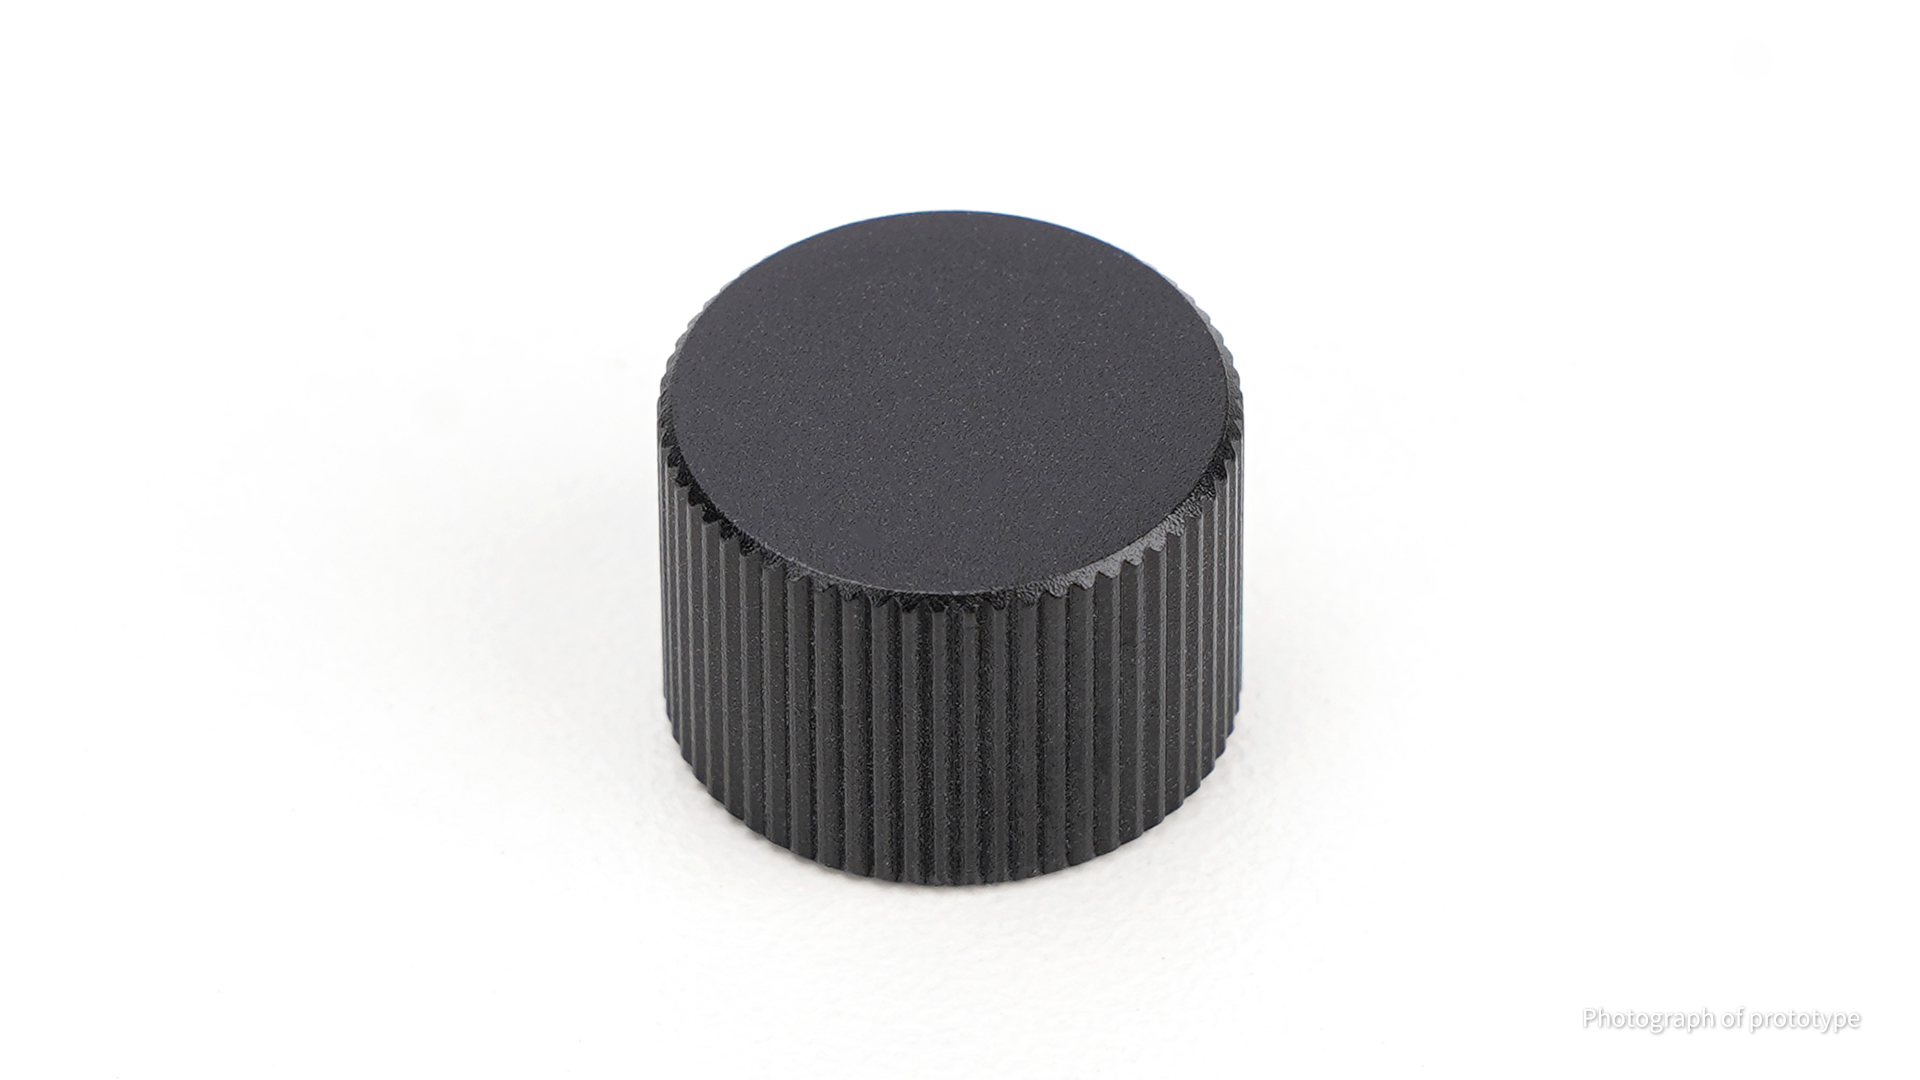 [In Stock] Zoom65 EE R2 - Extras Knobs and Weight